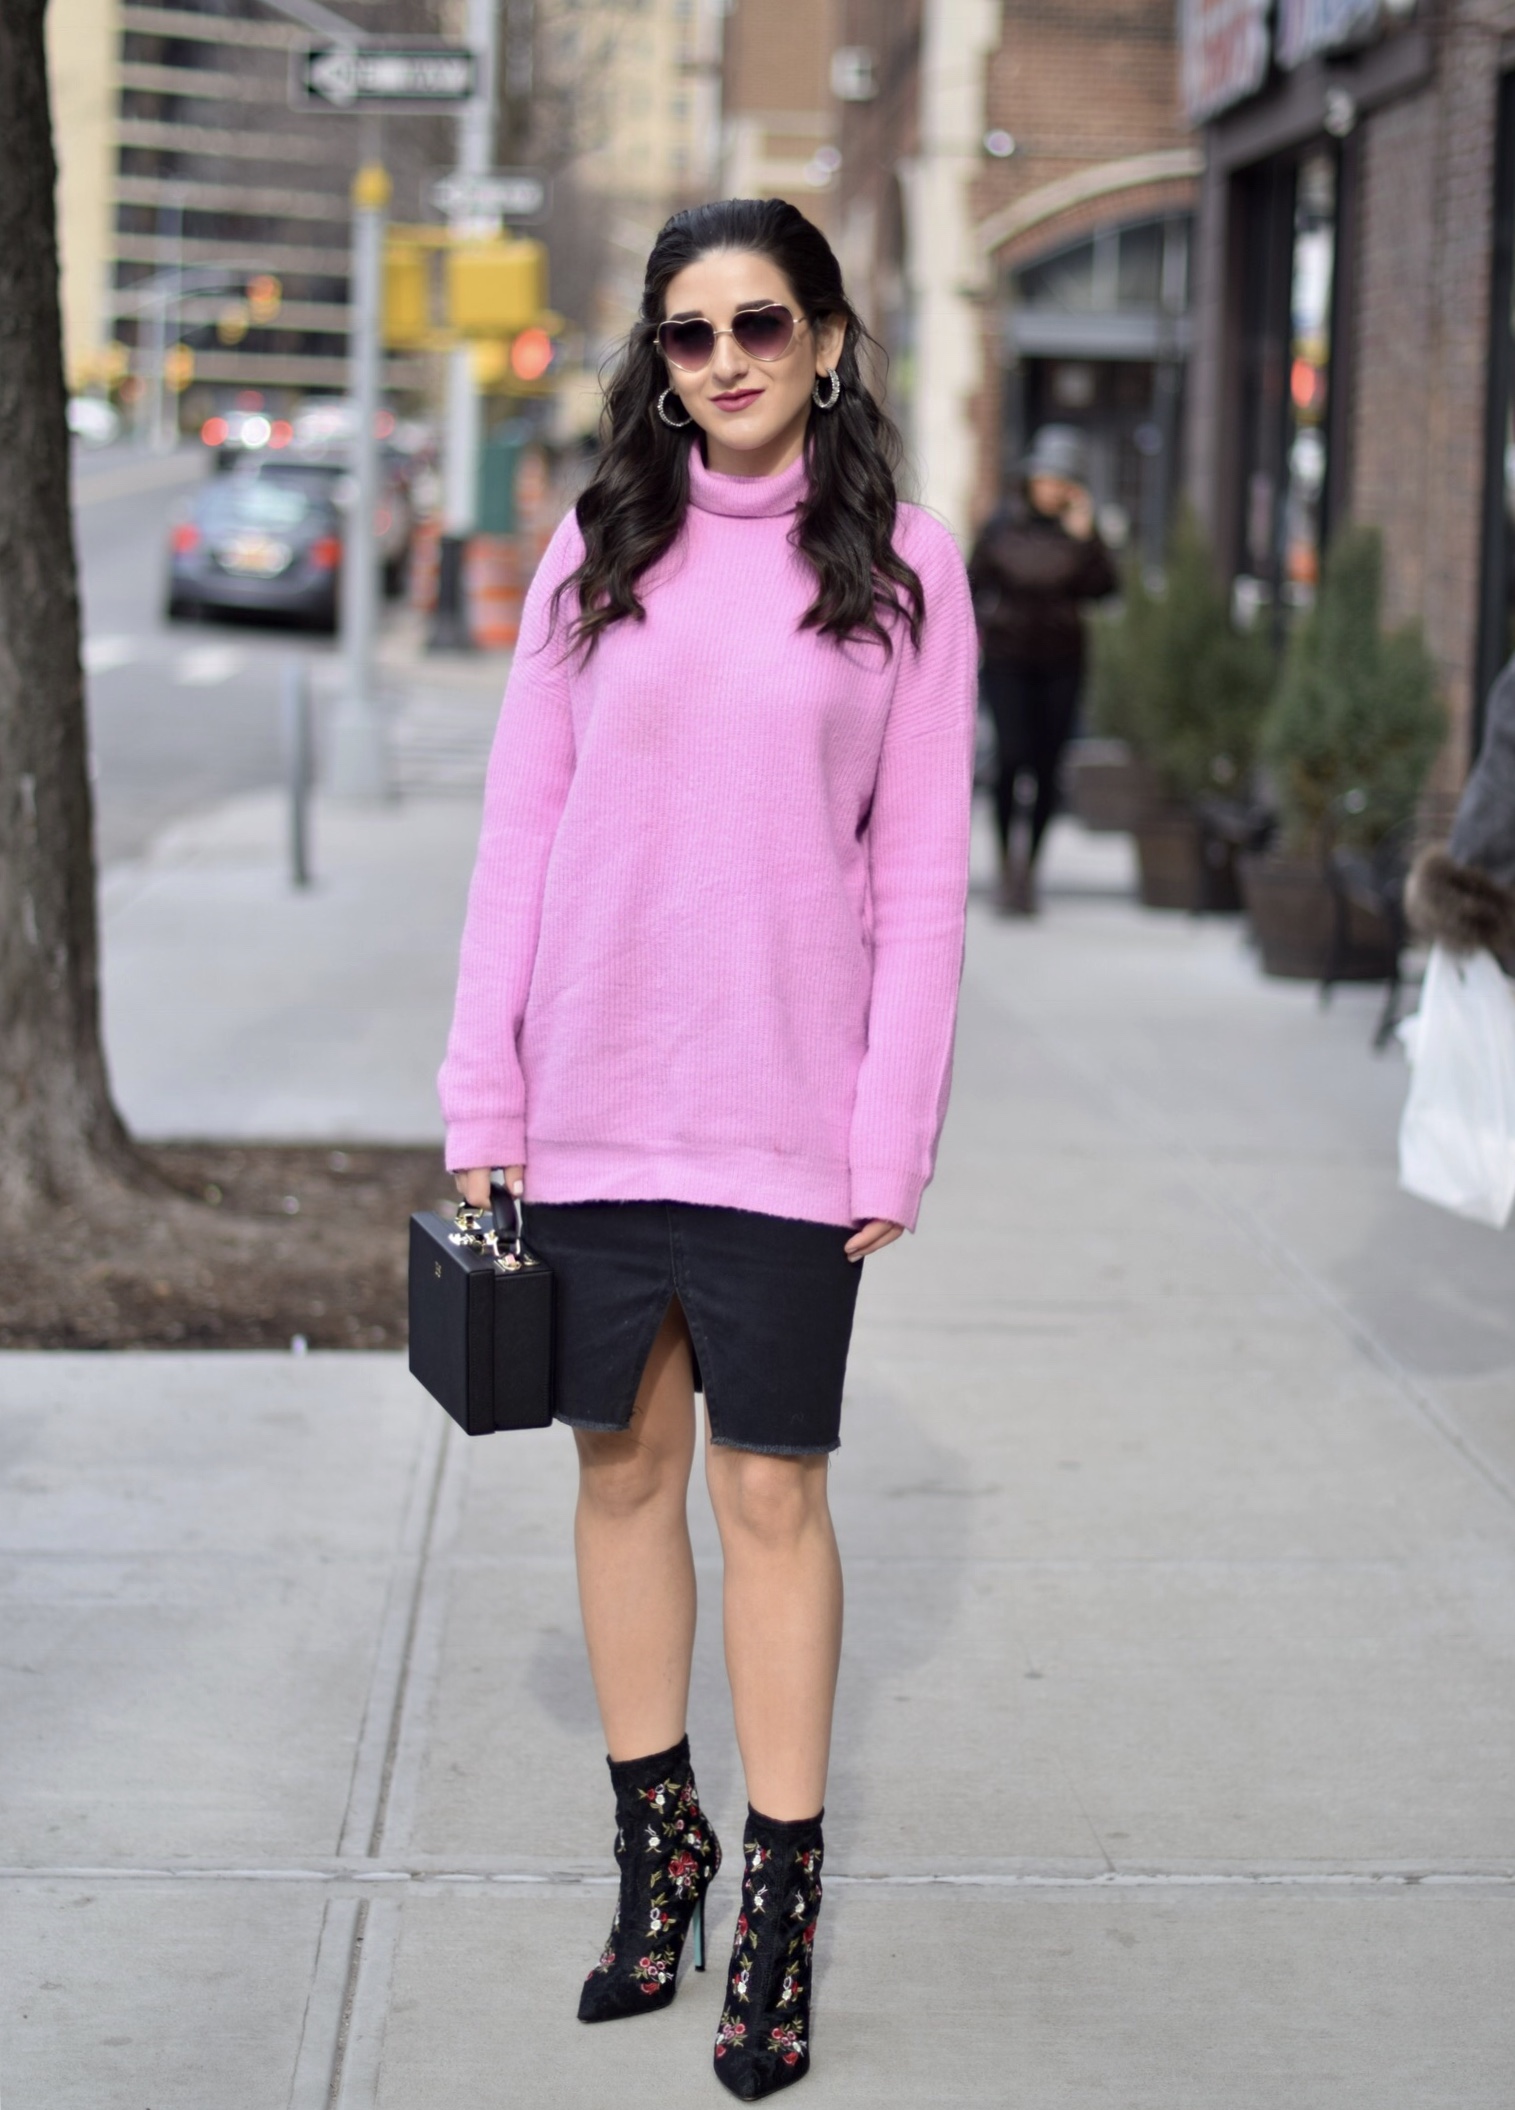 Surviving Winter With ASOS 5 Hardest Parts Of Blogging Esther Santer Fashion Blog NYC Street Style Blogger Outfit OOTD Trendy Pink Sweater Black Denim Skirt Box Bag Floral Booties Betsey Johnson Girl Women Purse  Heart Sunglasses Booties Accesories.jpg